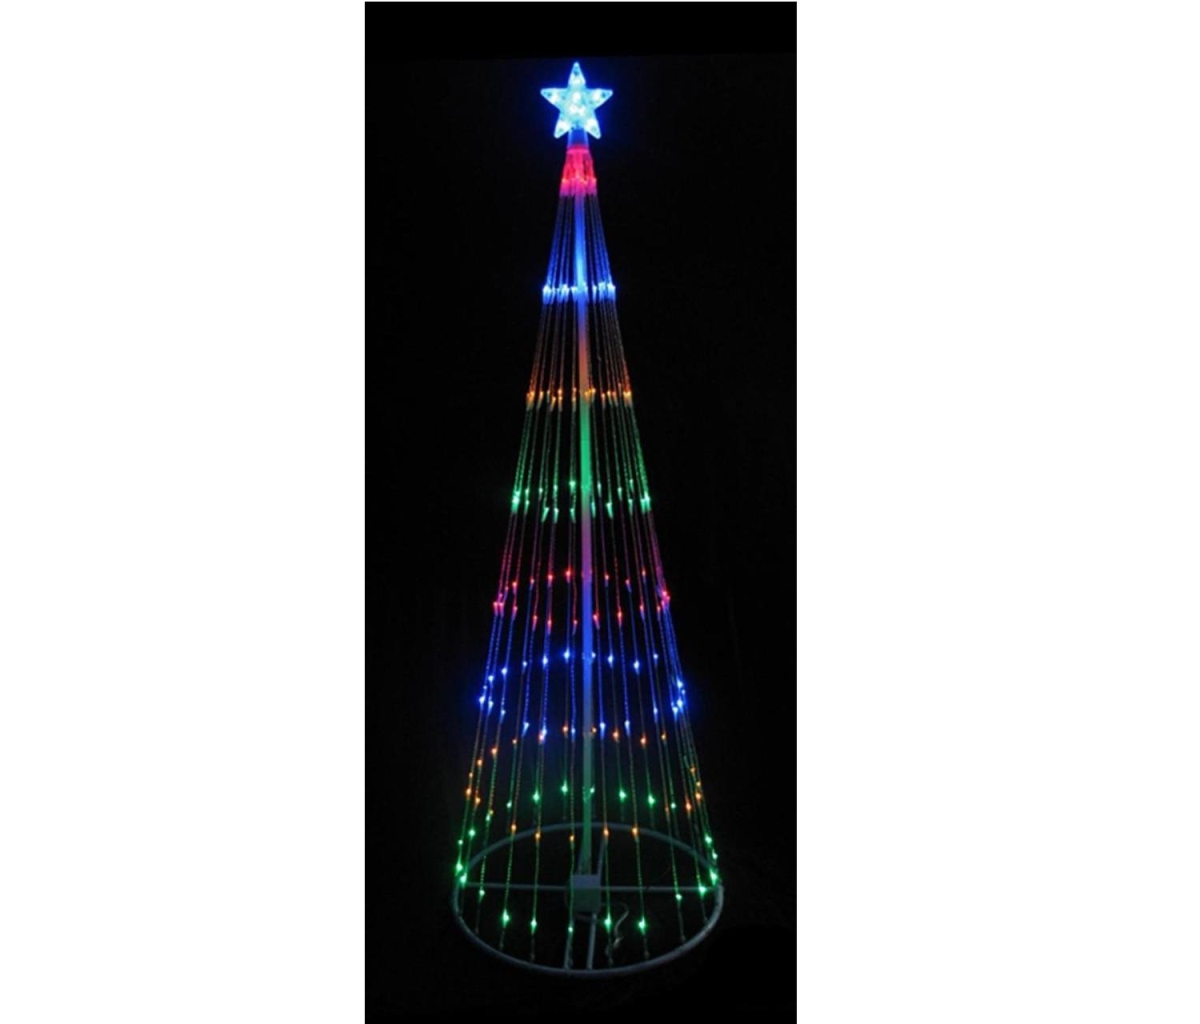 32912668 4 Ft. Led Lighted Show Cone Christmas Tree Outdoor Decoration, Multicolor